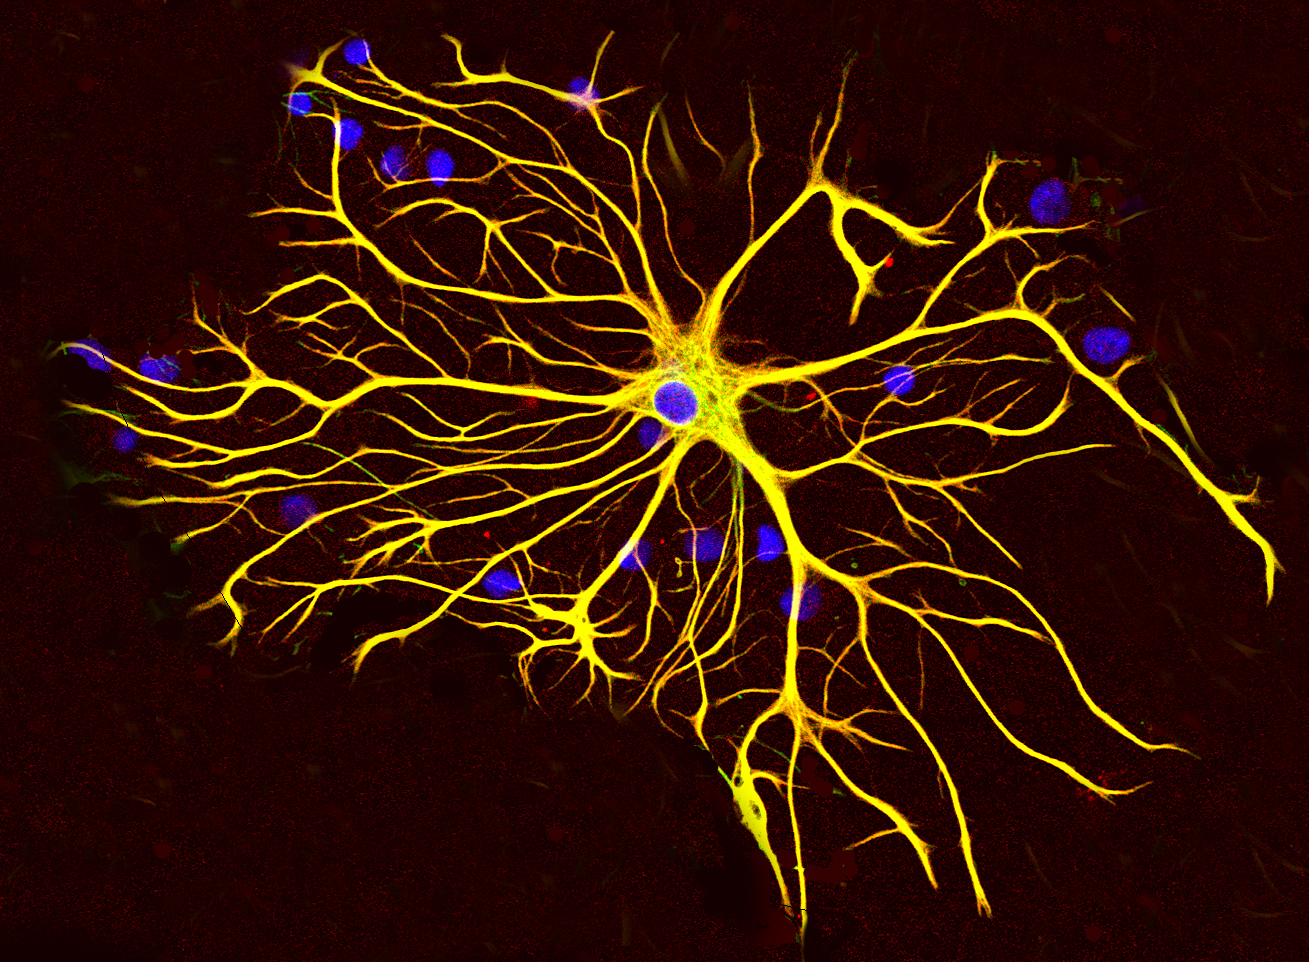 An astrocyte, a type of brain cell.